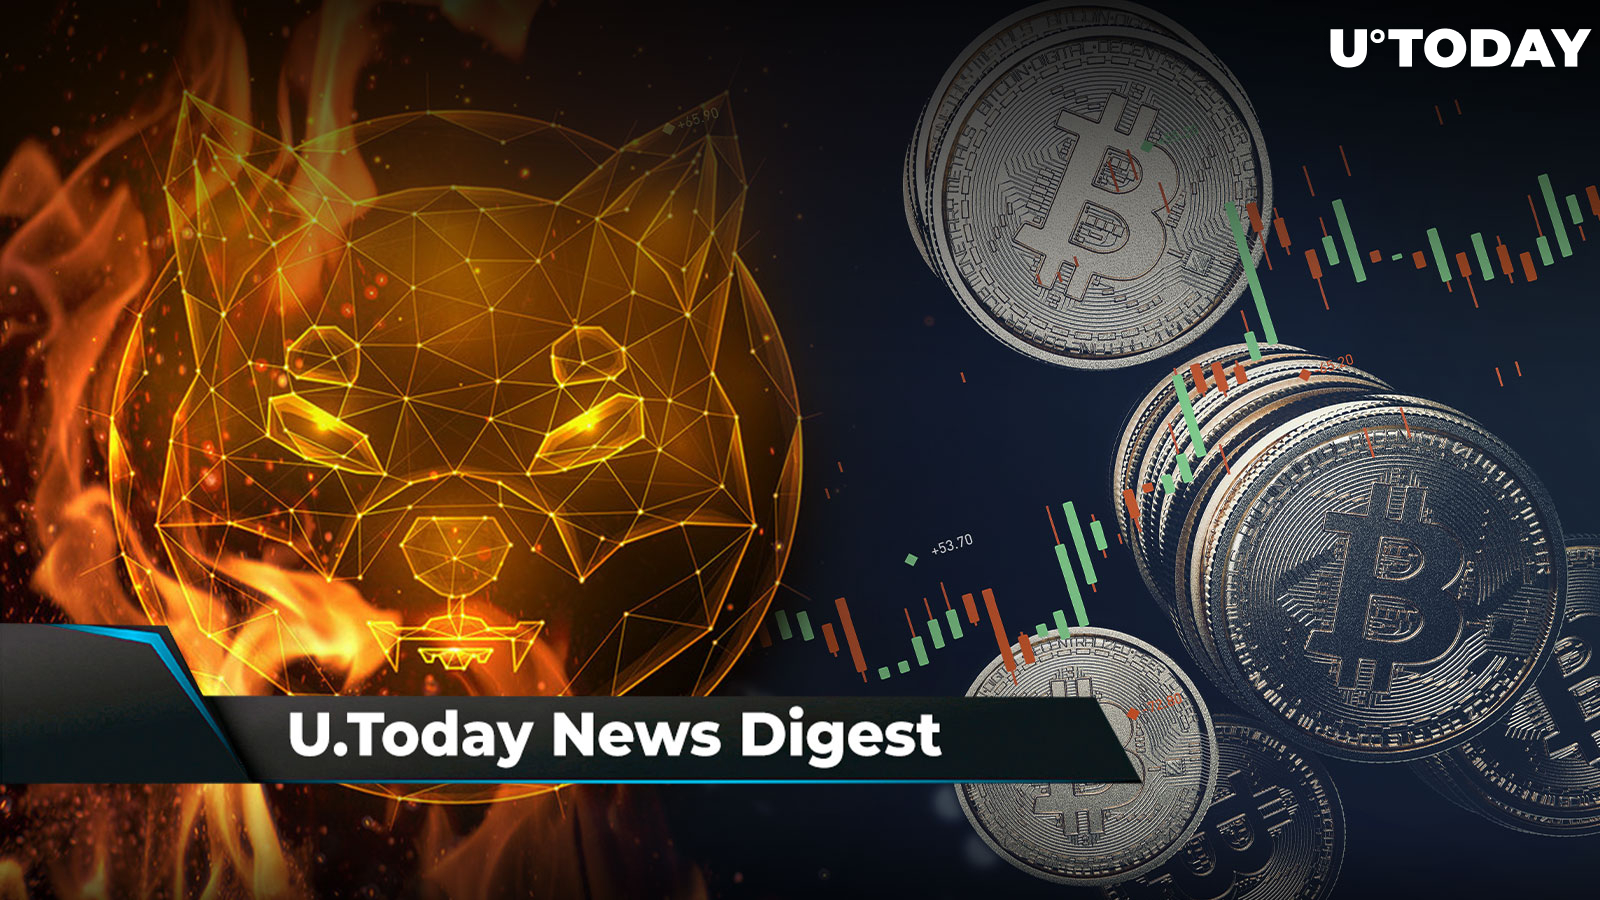 Lead SHIB Dev Urges Getting Popcorn Ready, Pro Ripple Lawyer Comments on SHIB Burn Estimates, BTC Completes 'Extremely Rare' Pattern: Crypto News Digest by U.Today